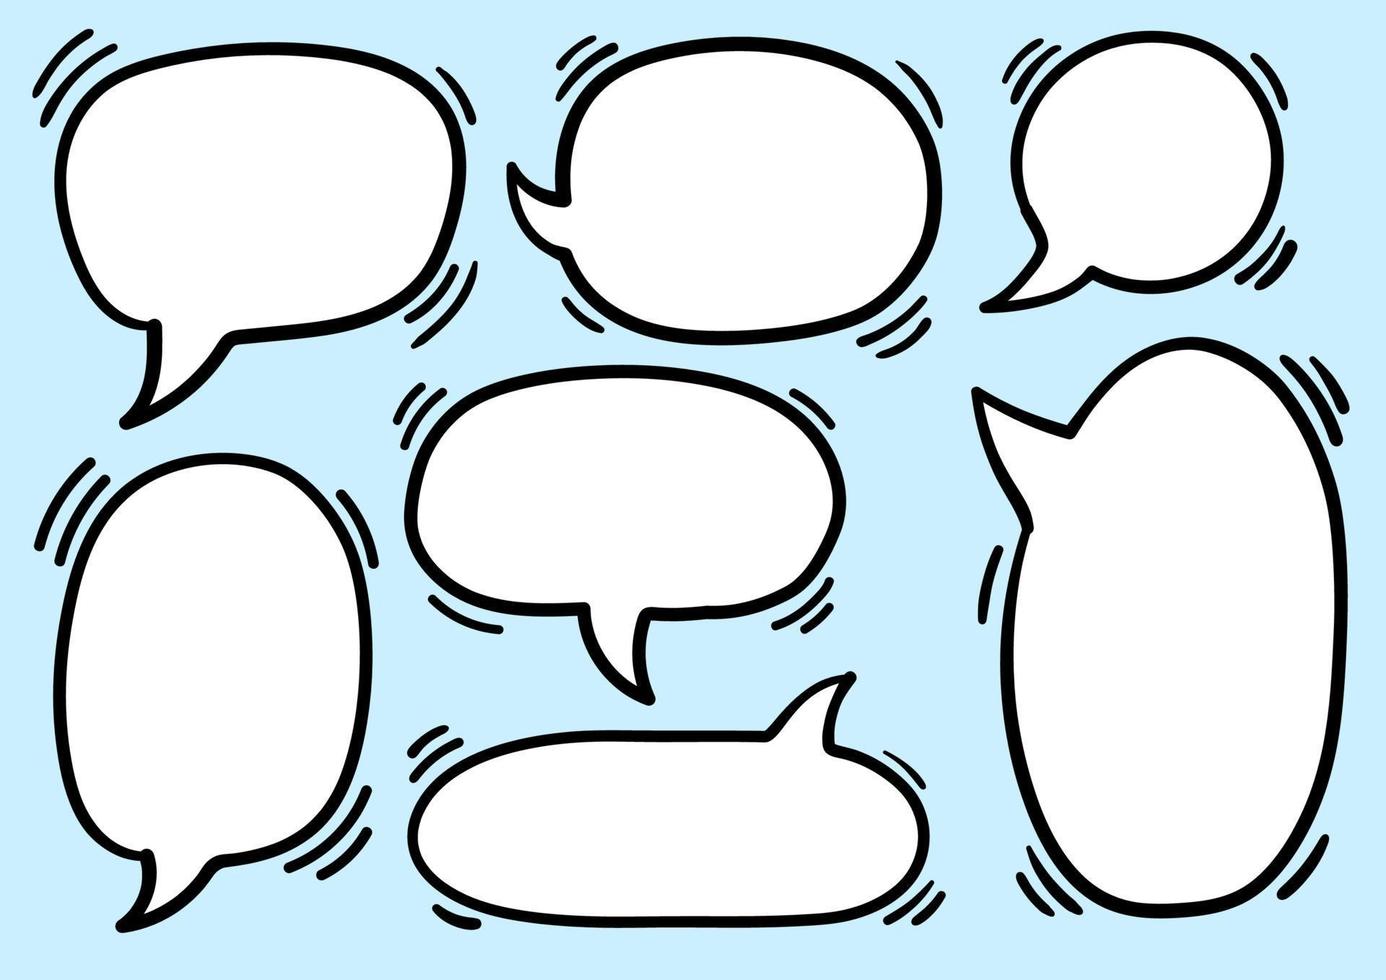 Isolated Freehand Handrawn Speech Bubbles And Signs For Cartooning, Comic, And Doodling Design. Premium Vector